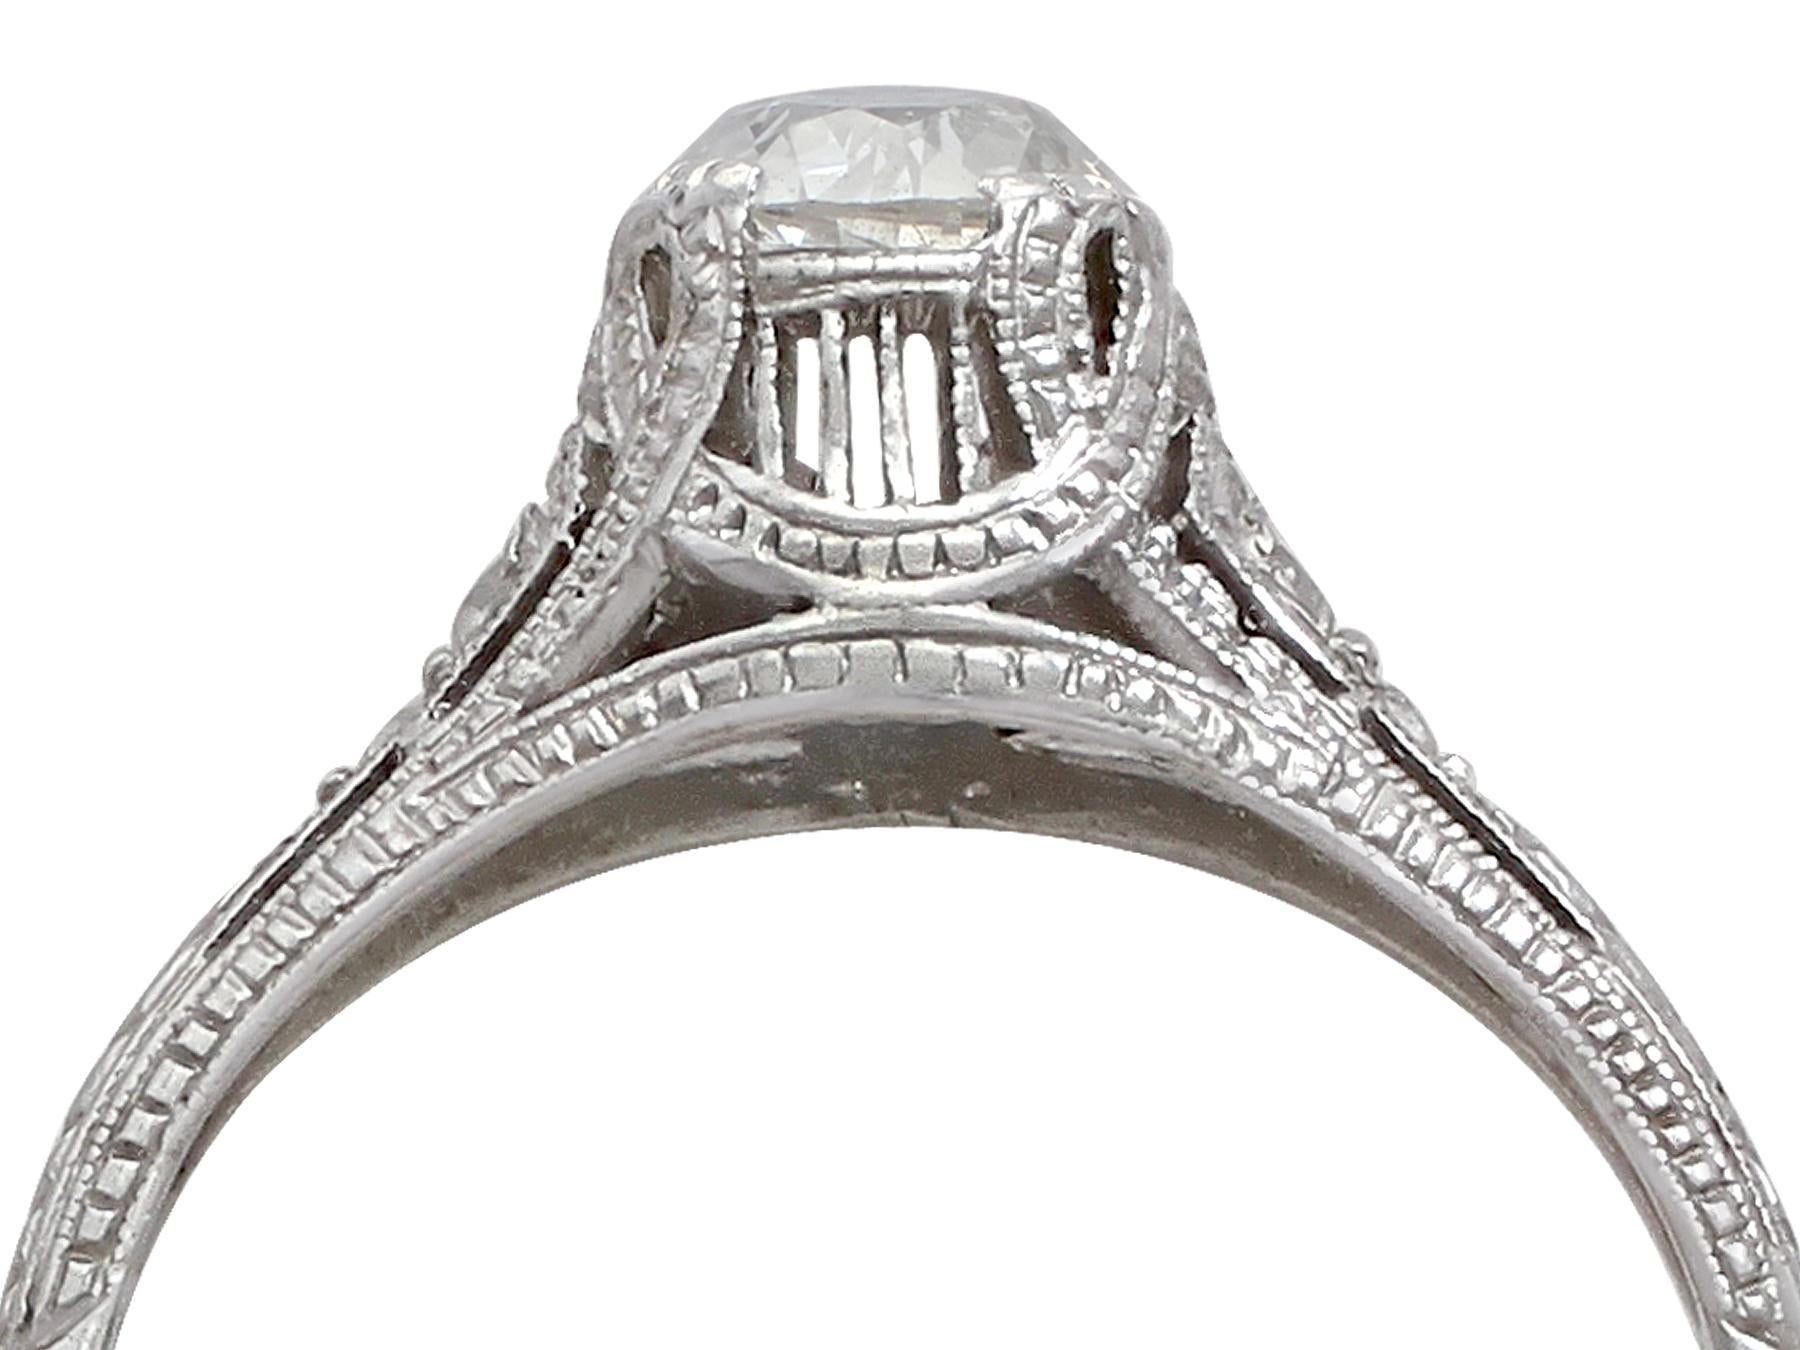 An impressive antique 0.94 carat diamond and platinum solitaire style engagement ring; part of our diverse antique jewelry and estate jewelry collections.

This stunning, fine and impressive antique engagement ring has been crafted in platinum.

The